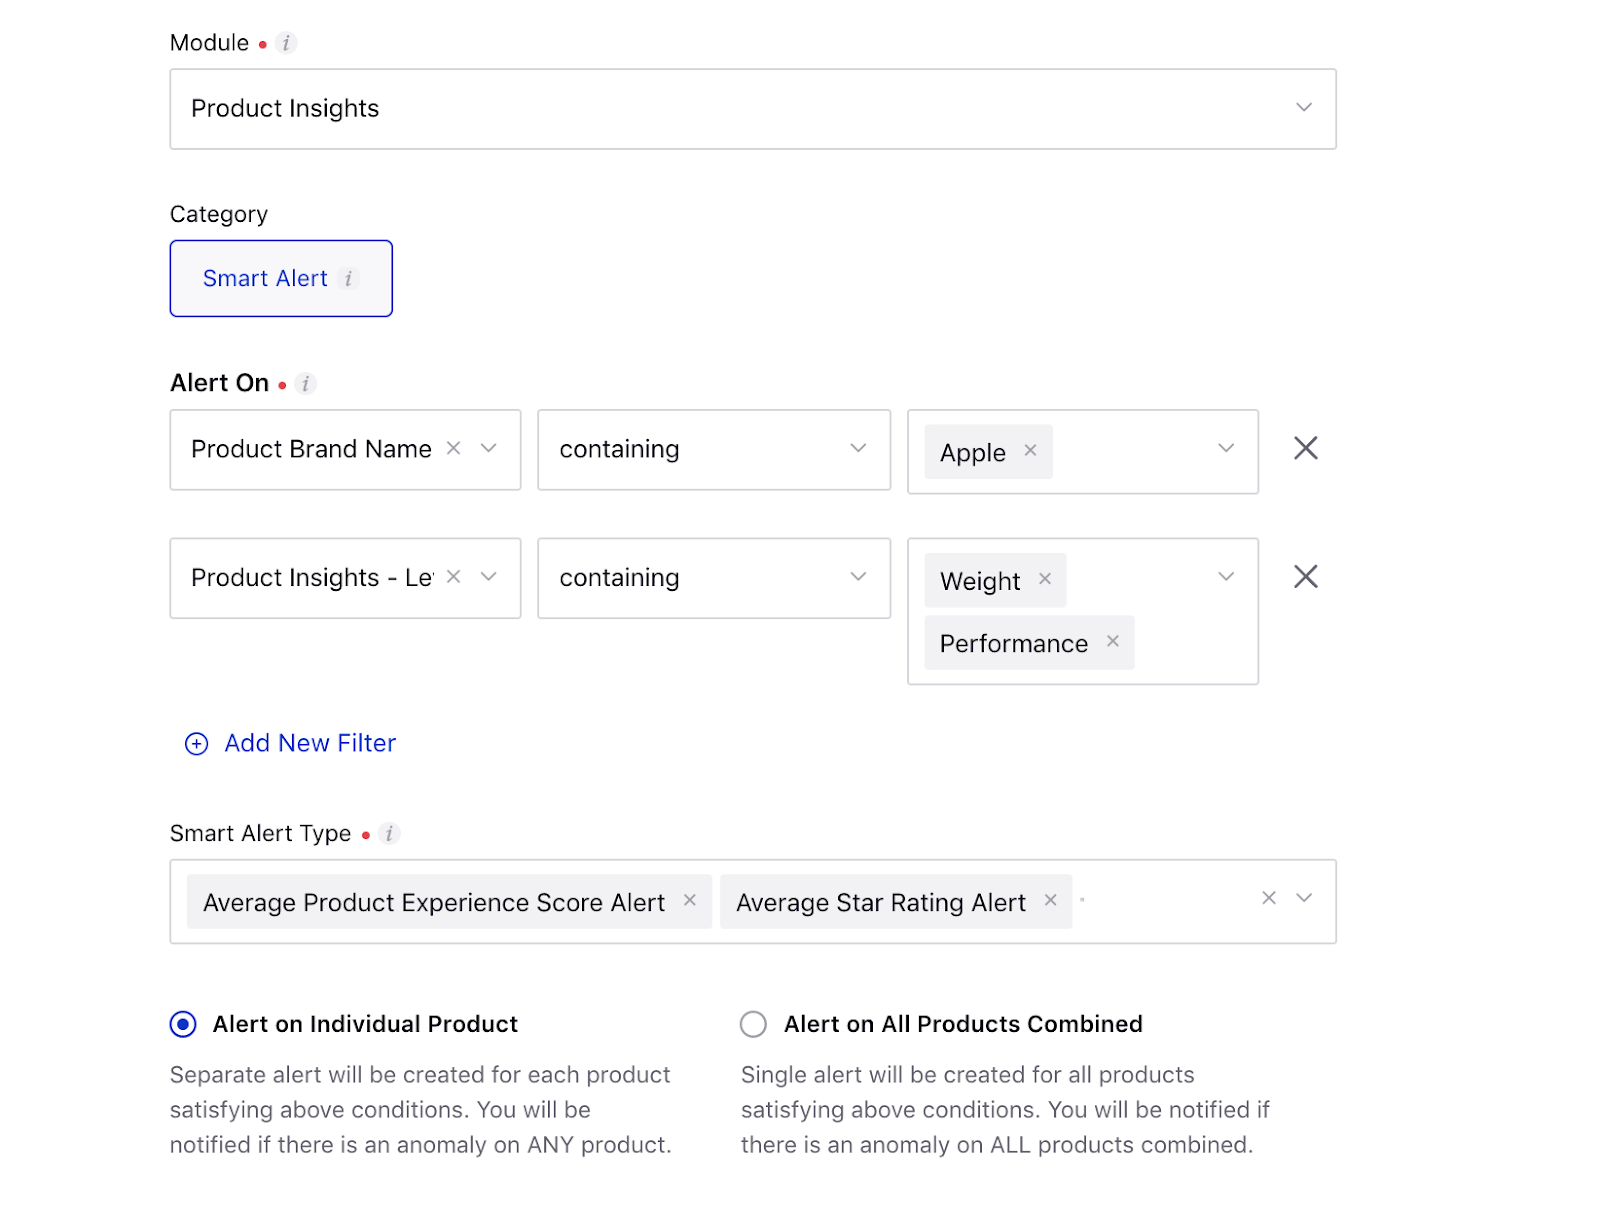 Creating new alert for Product Insights – Alert on Individual Product